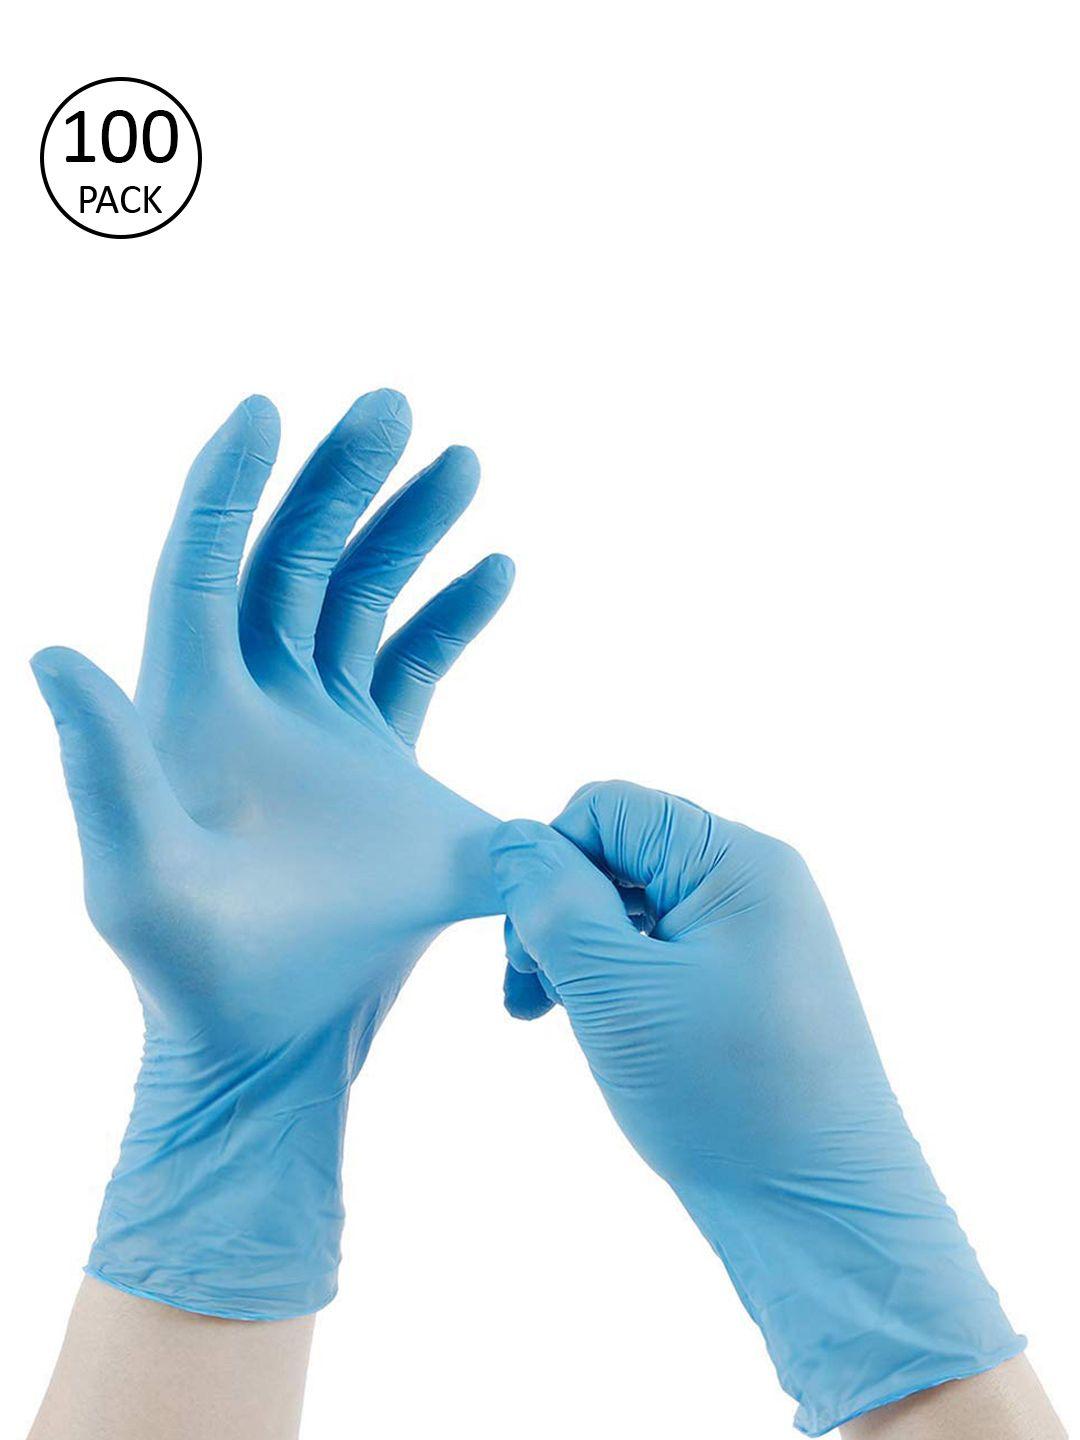 london fashion hob unisex pack of 100 blue solid surgical disposable hand gloves